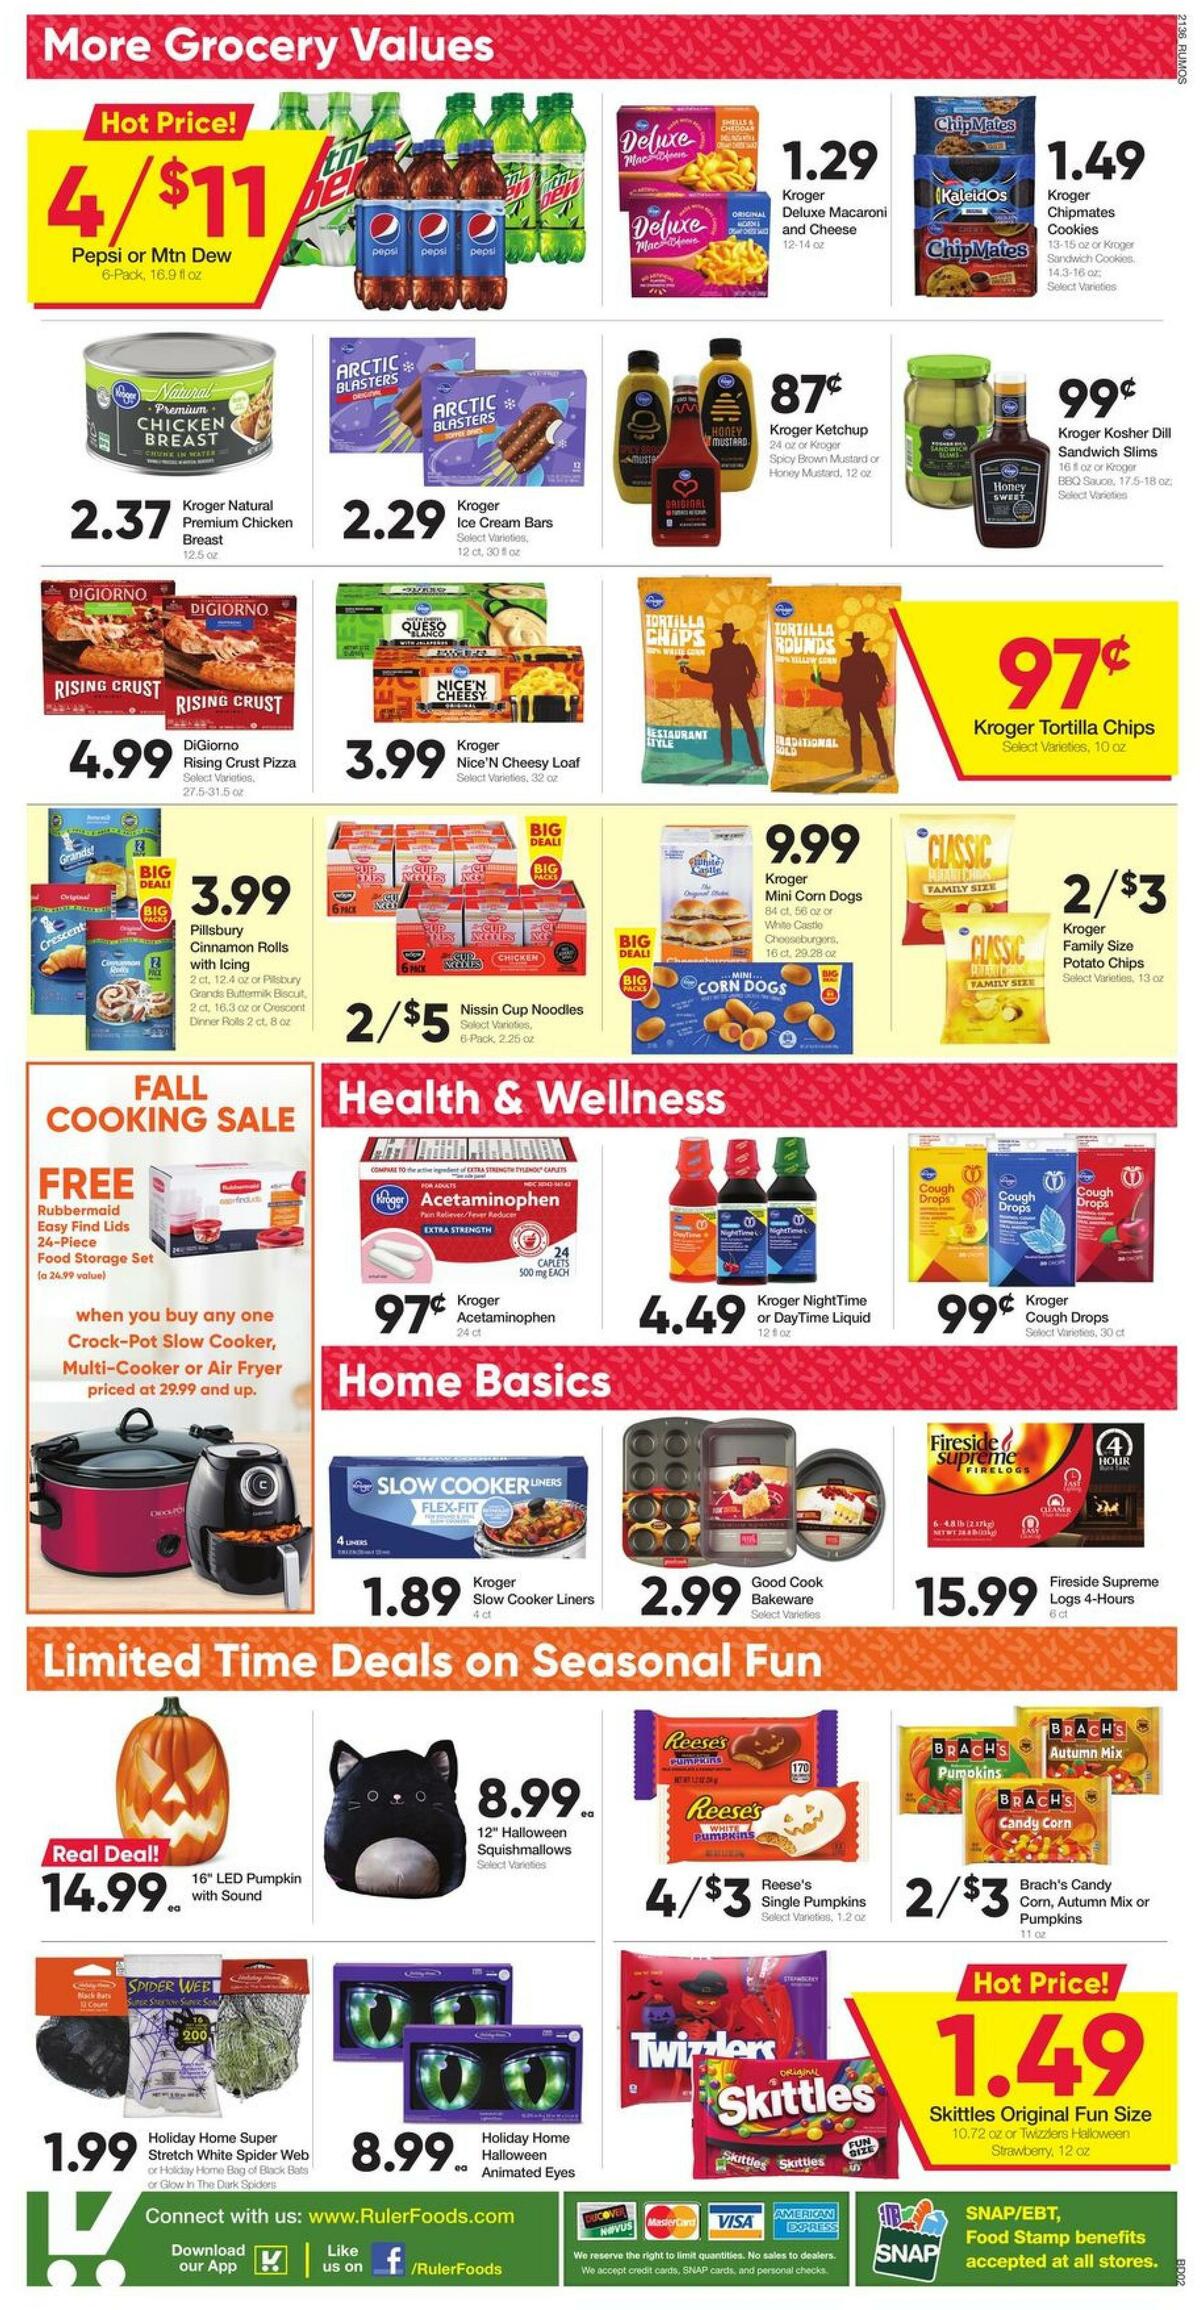 Ruler Foods Weekly Ad from October 6